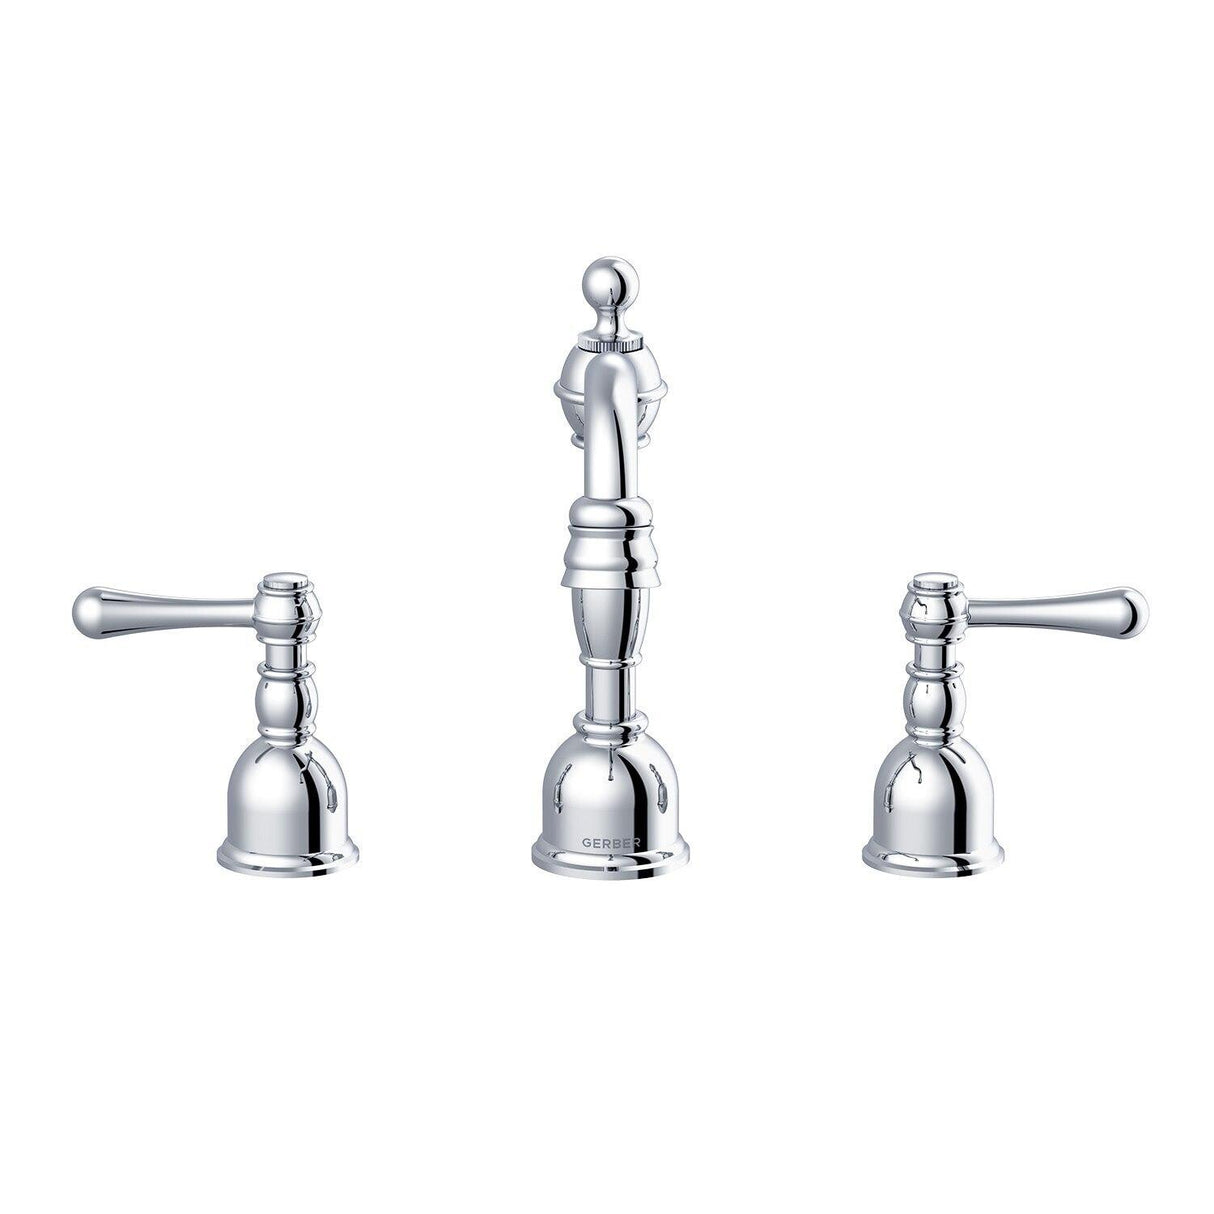 Gerber D303257BN Brushed Nickel Opulence Two Handle Widespread Lavatory Faucet